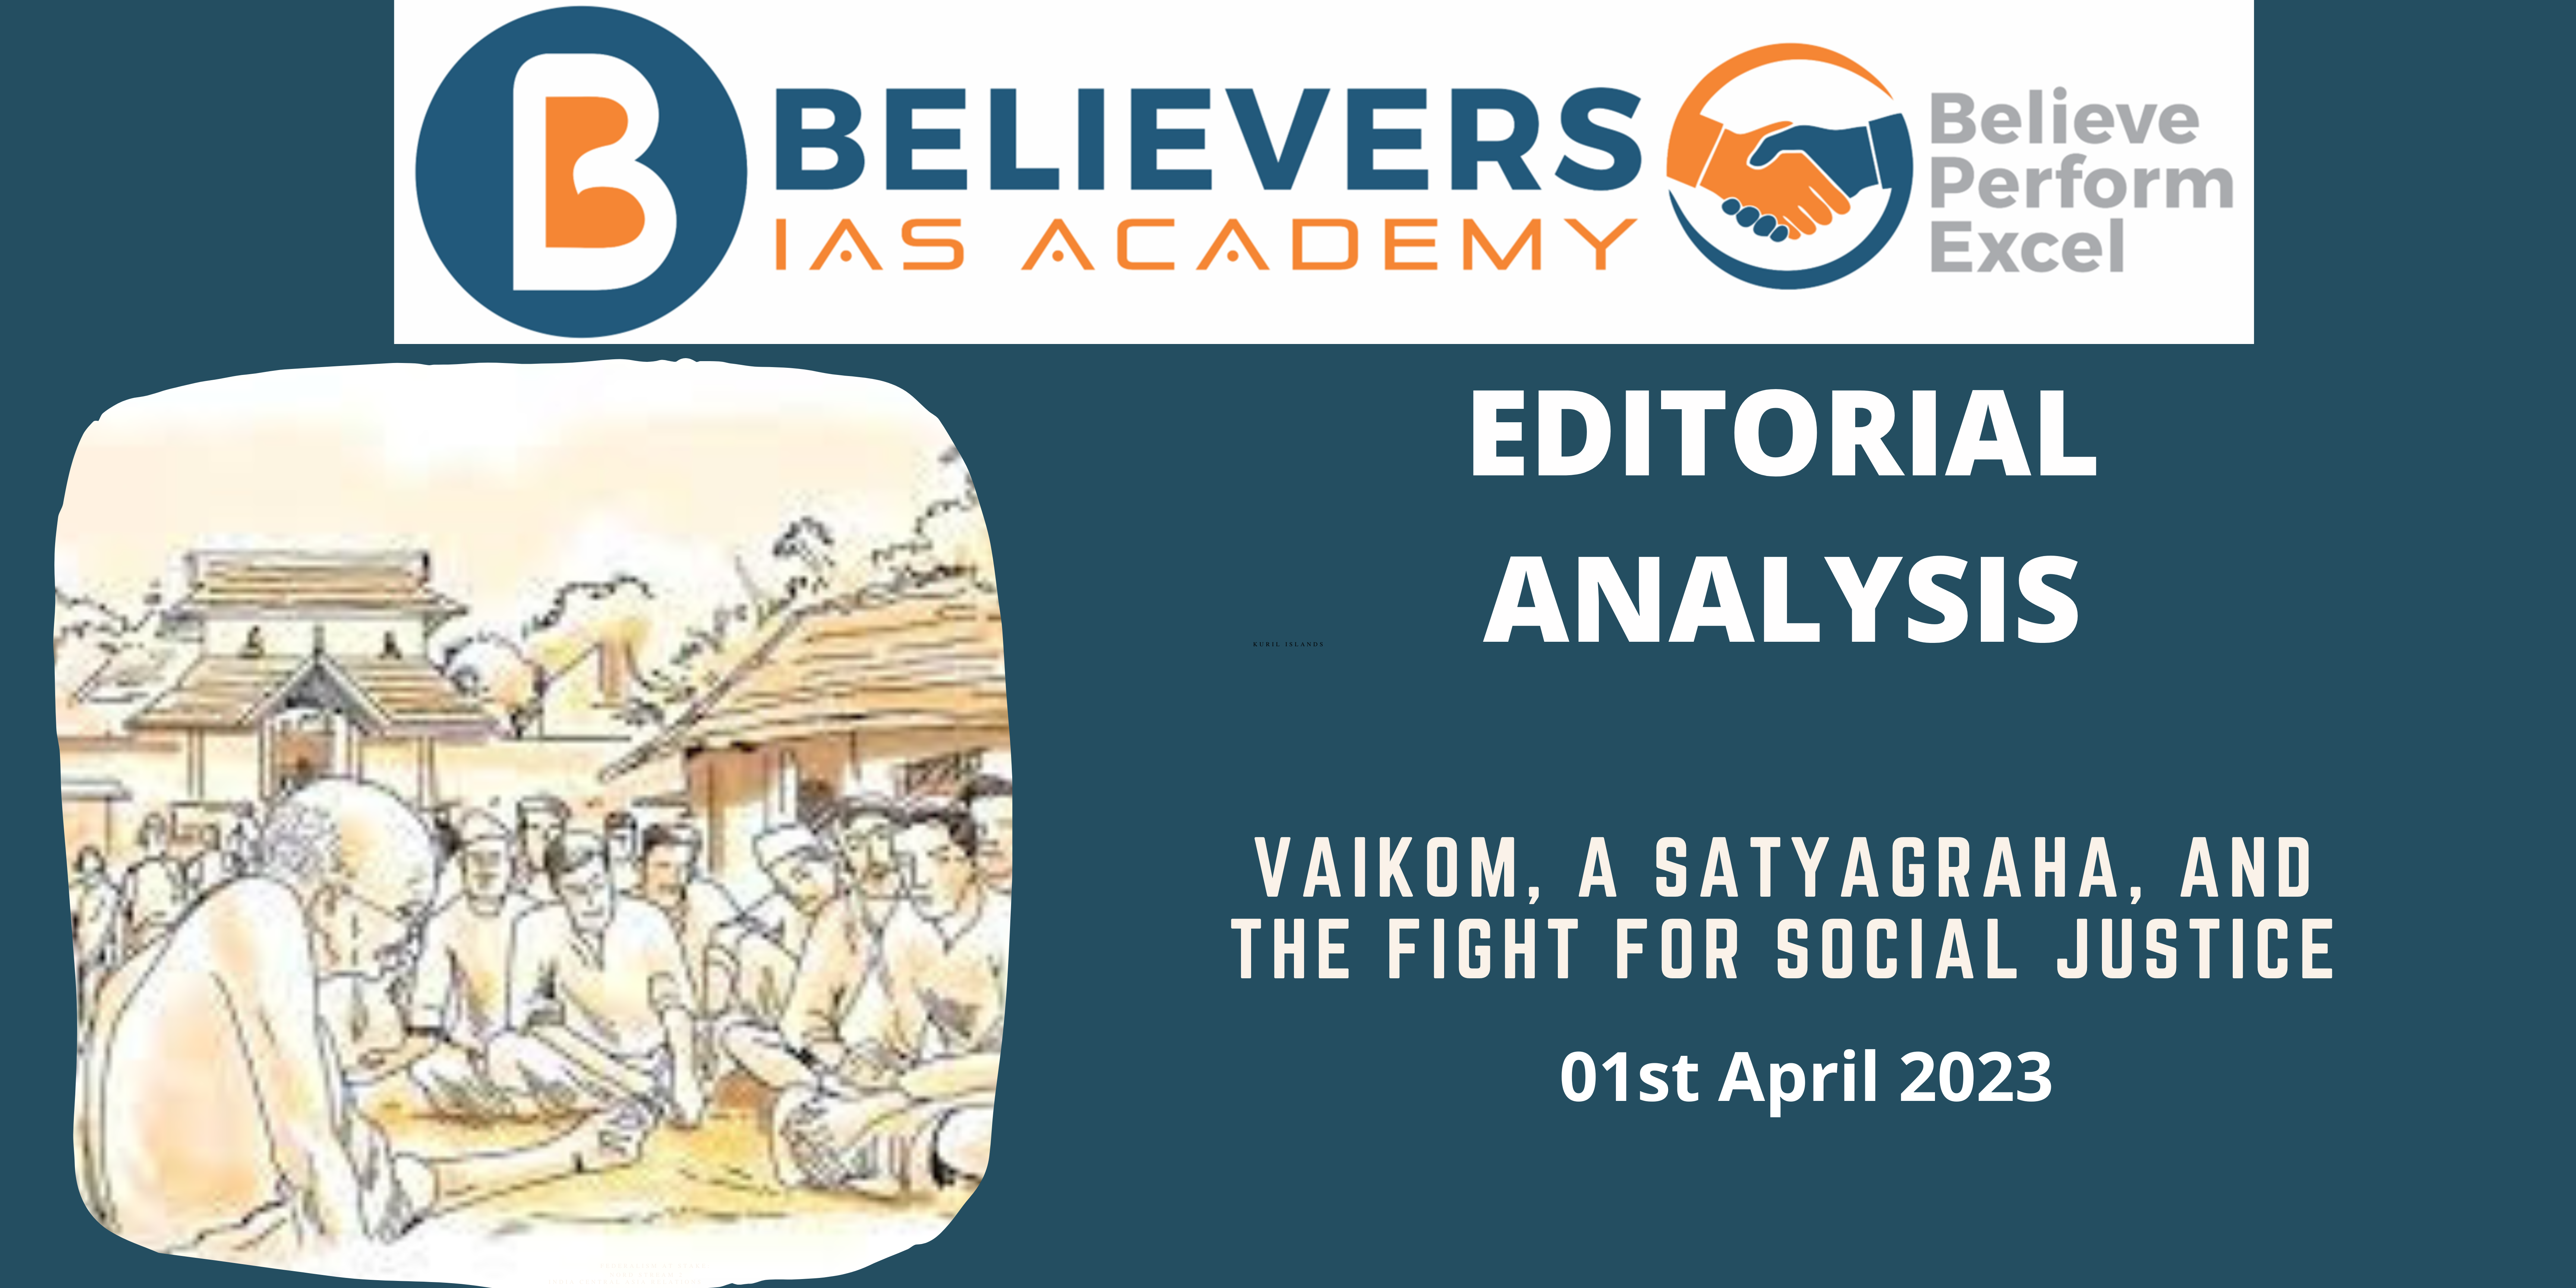 Vaikom, a satyagraha, and the fight for social justice